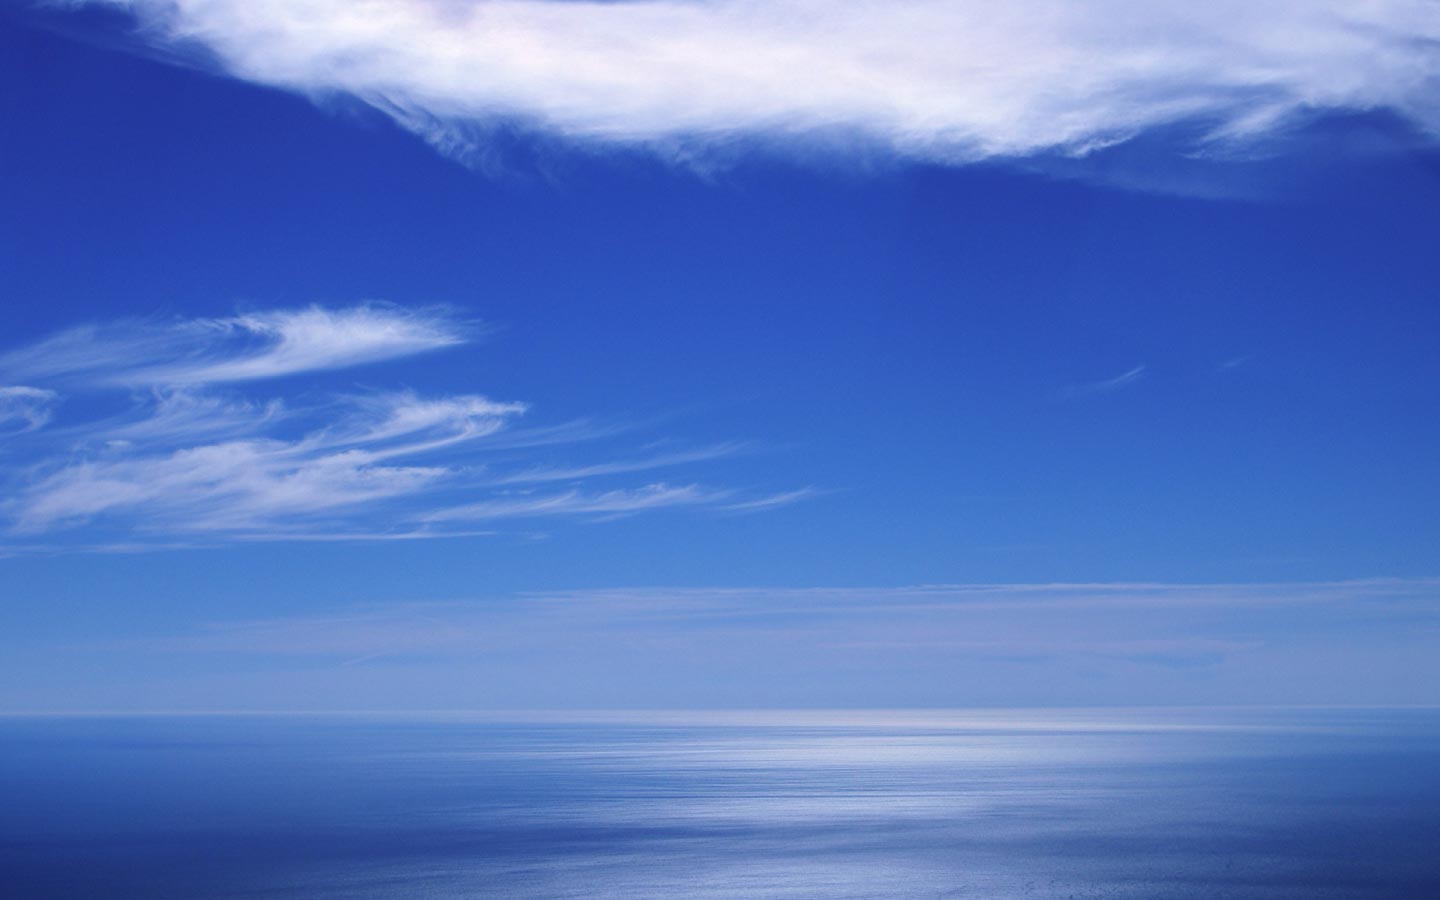 Blue Sea Horizon Weather Wallpaper Image Featuring Clouds